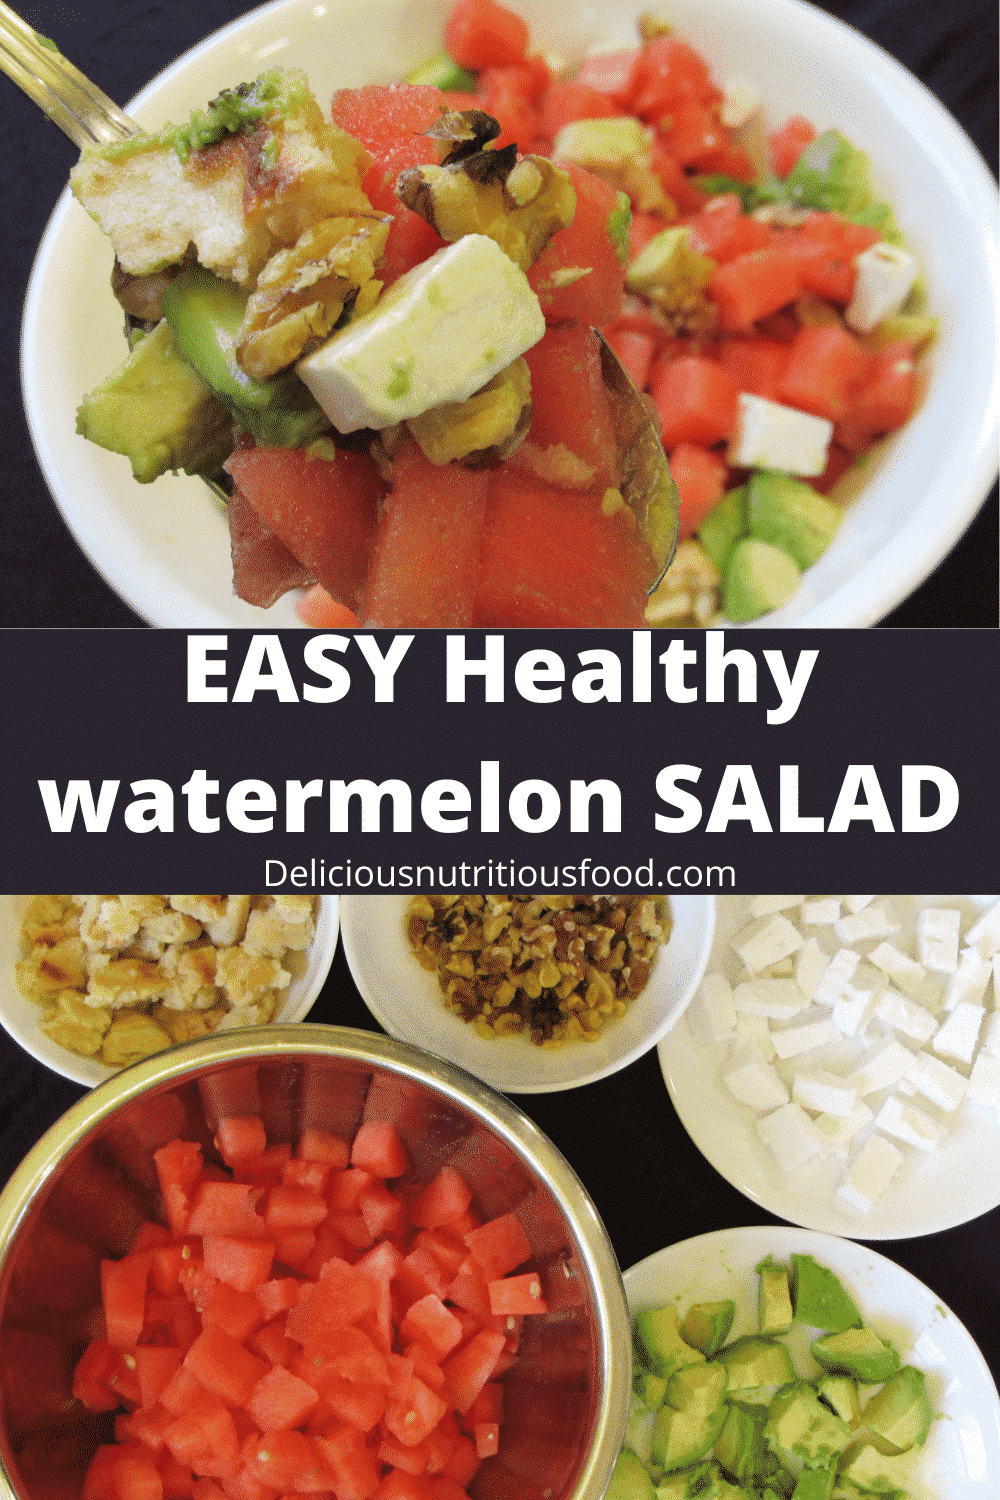   Easy watermelon salad made with avocado and feta cheese #watermelonavocadosalad #watermelonandavocadosalad #watermelonavocadofetasalad #watermelonfetaavocadosalad #watermelonsaladwithavocado #watermelonavocadosaladrecipe #Salad #thebestsalad #homemadesalad #goodsalads #saladrecipes #saladideas #saladrecipesfordinner #homemadesaladrecipeshealthy  #fruitrecipes #fruitrecipeshealthy #recipesIlove #5ingredientsrecipes, #deliciousnutritiousfodds#sides #sidedishes #veggysides #vegetablessidedishes #tastysides #easysidedishes #healthysides #summersidedishes #watermelonsalad #watermelonsaladwithfeta #watermelonsaladfeta #recipeforwatermelonsalad #watermelonsaladrecipe #watermelonsaladrecipes #recipesforwatermelonsalad #watermelonsaladfeta #healthywatermelonrecipes #eatingwatermelon #watermelondessert  #watermelonidearecipes #summerwatermelon #watermelonideas #watermelonfoodidea #watermelonsalad #easysidedishes #foodie #fromscratchrecipes #goodsalad #healthyfood #healthyrecipes #homemade #quickrecipes #saladideas #saladrecipeshealthy #sidedishes #simplerecipes #tastysalad #tastysides #Thebestsalad #veganrecipes #vegetarianrecipes #yummy #easyrecipes #summersaladrecipes #summerfoods #summersidedishes #summerwatermelon 